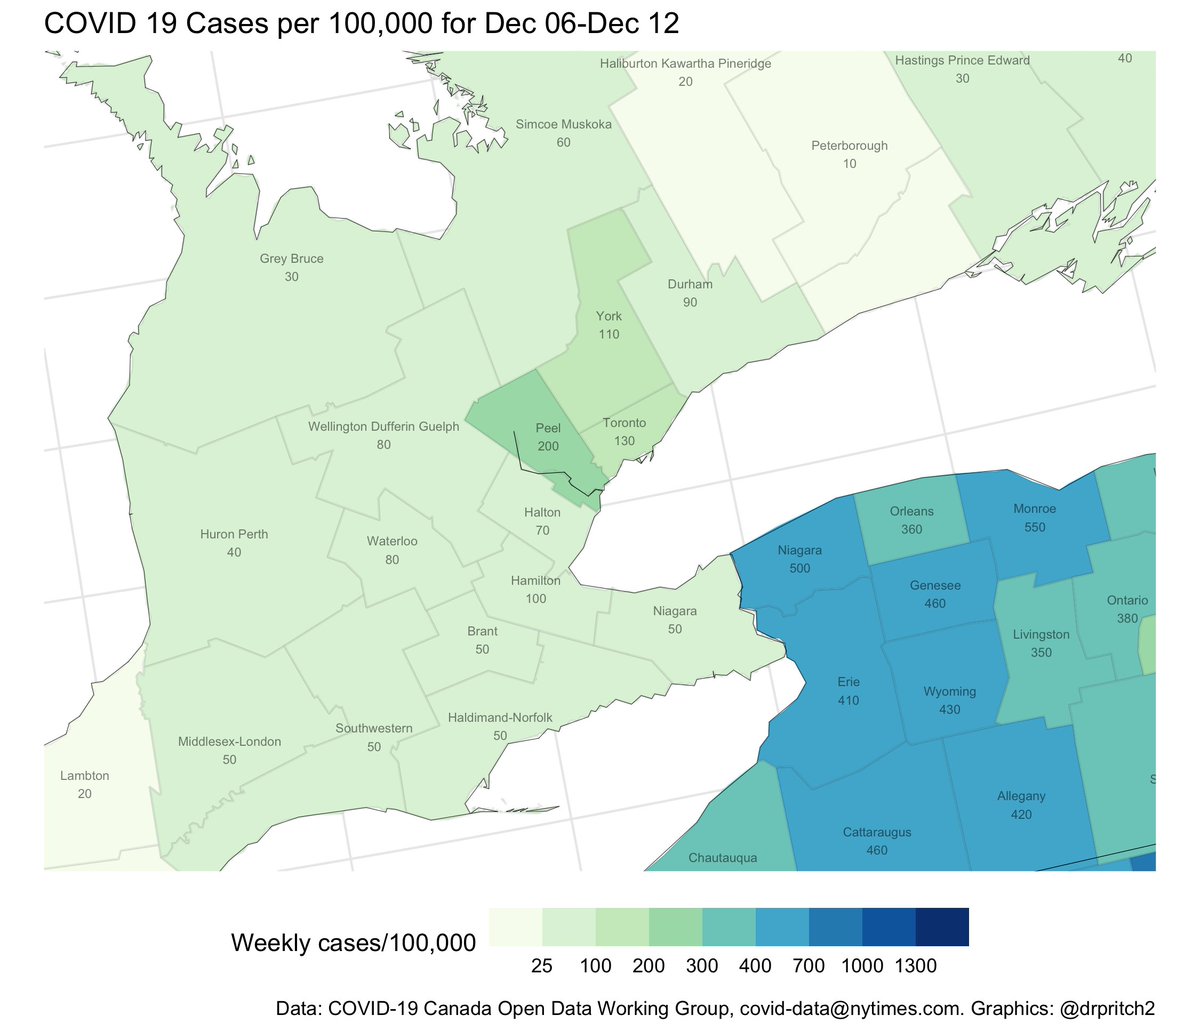 2/ Greater Toronto region: Peel and Toronto finally stabilized, York joins the lockdown; Hamilton and Durham nearly there.Across the border: Buffalo (Erie) stable, but rising rates across nearby parts of New York. Rochester (Monroe) up 50% over last two weeks, almost 3x Peel.